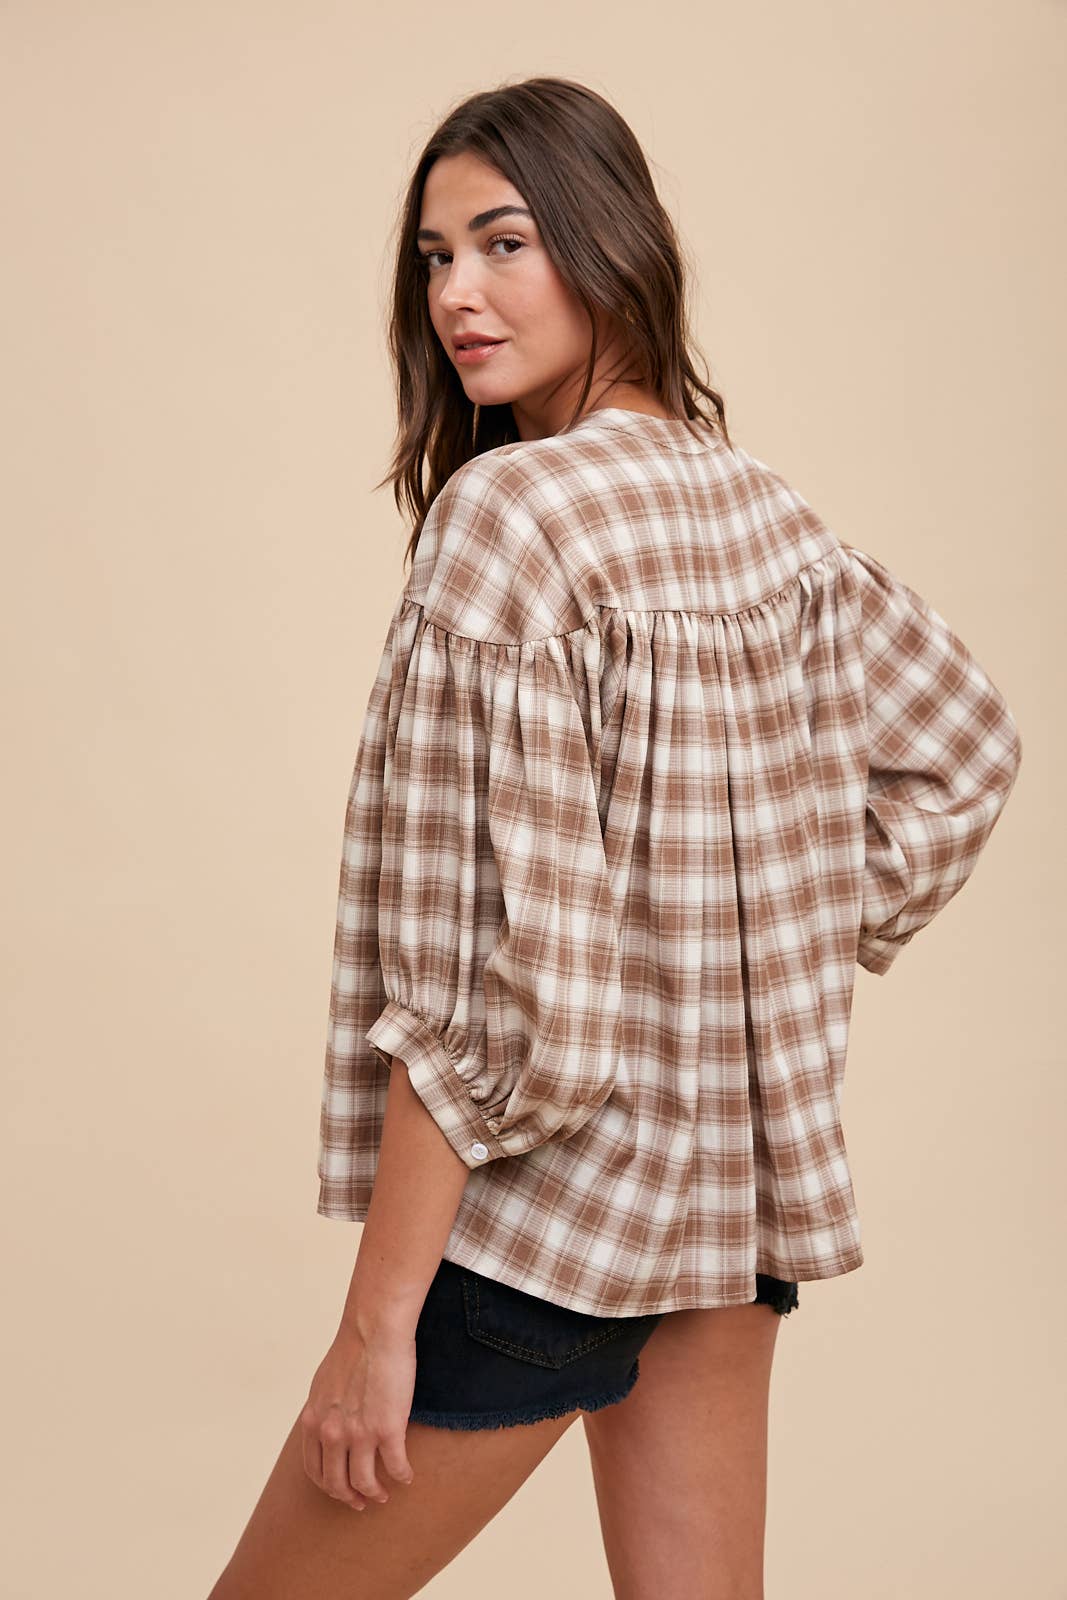 CHECK MATE  RELAXED FIT  TOP